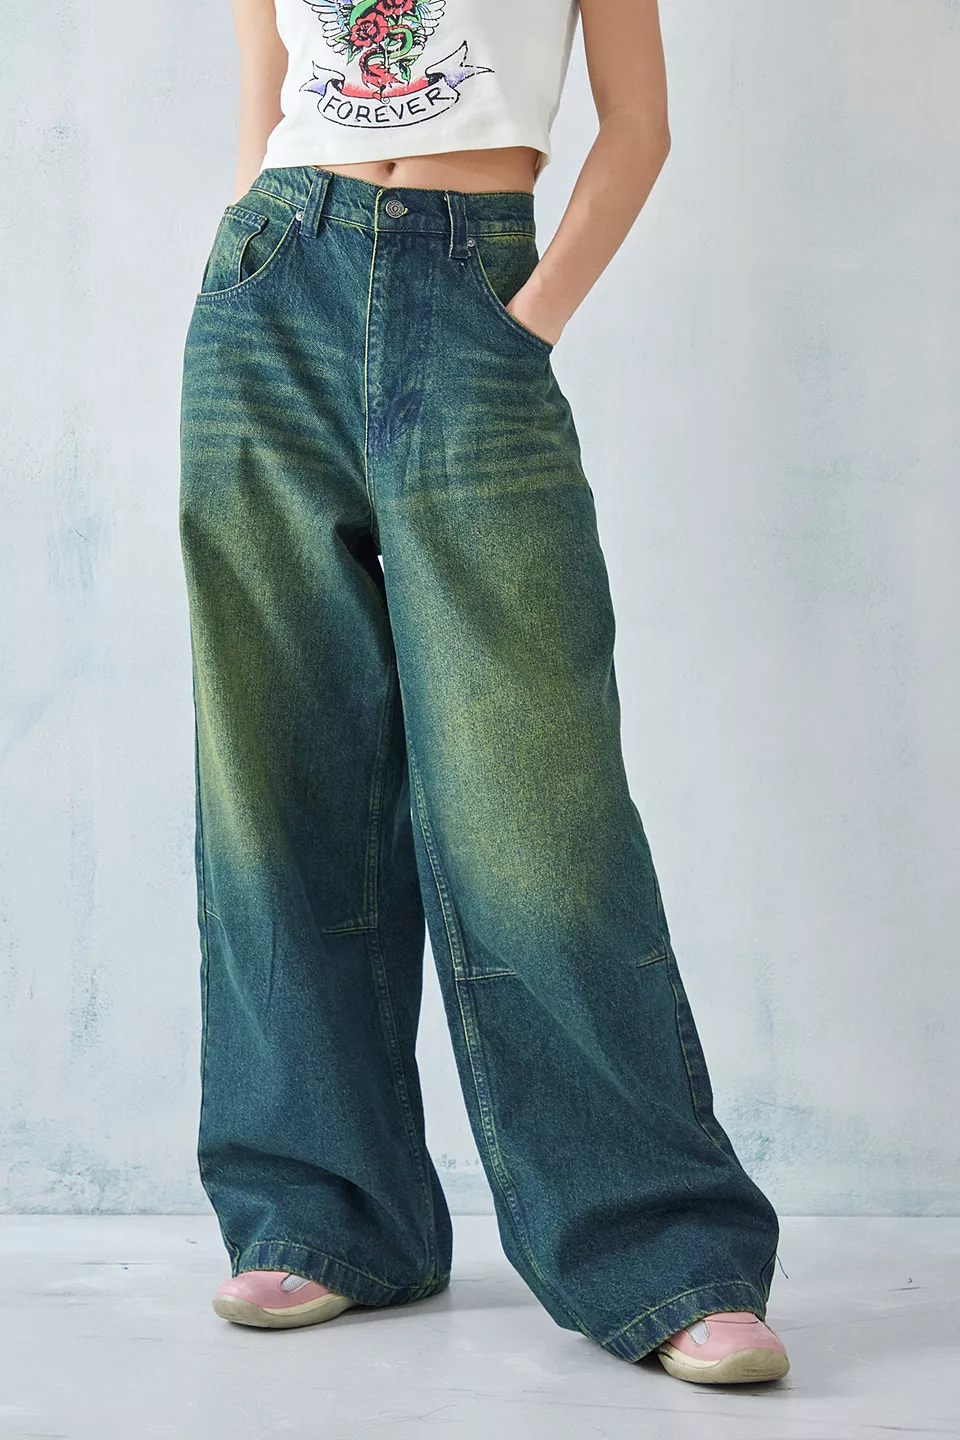 urbanoutfitters.com | Jaded London Tinted Green Colossus Jeans